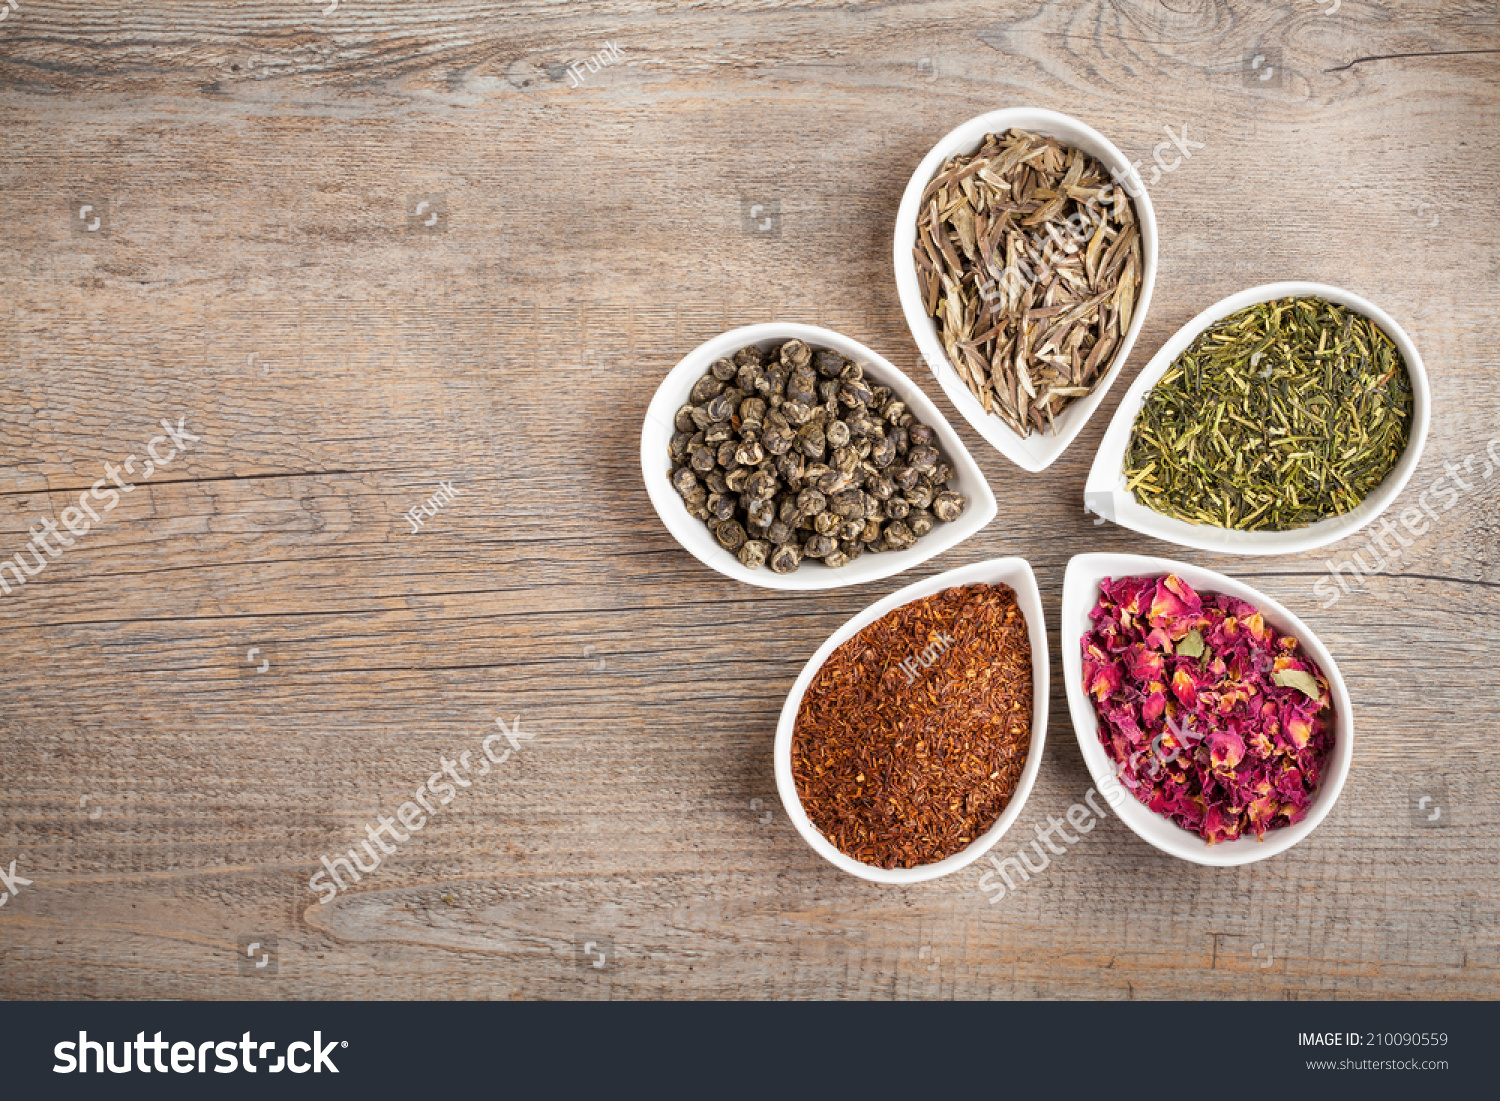 A Colorful Assortment Of Loose Teas In Petal Shaped Bowls On A Wooden ...